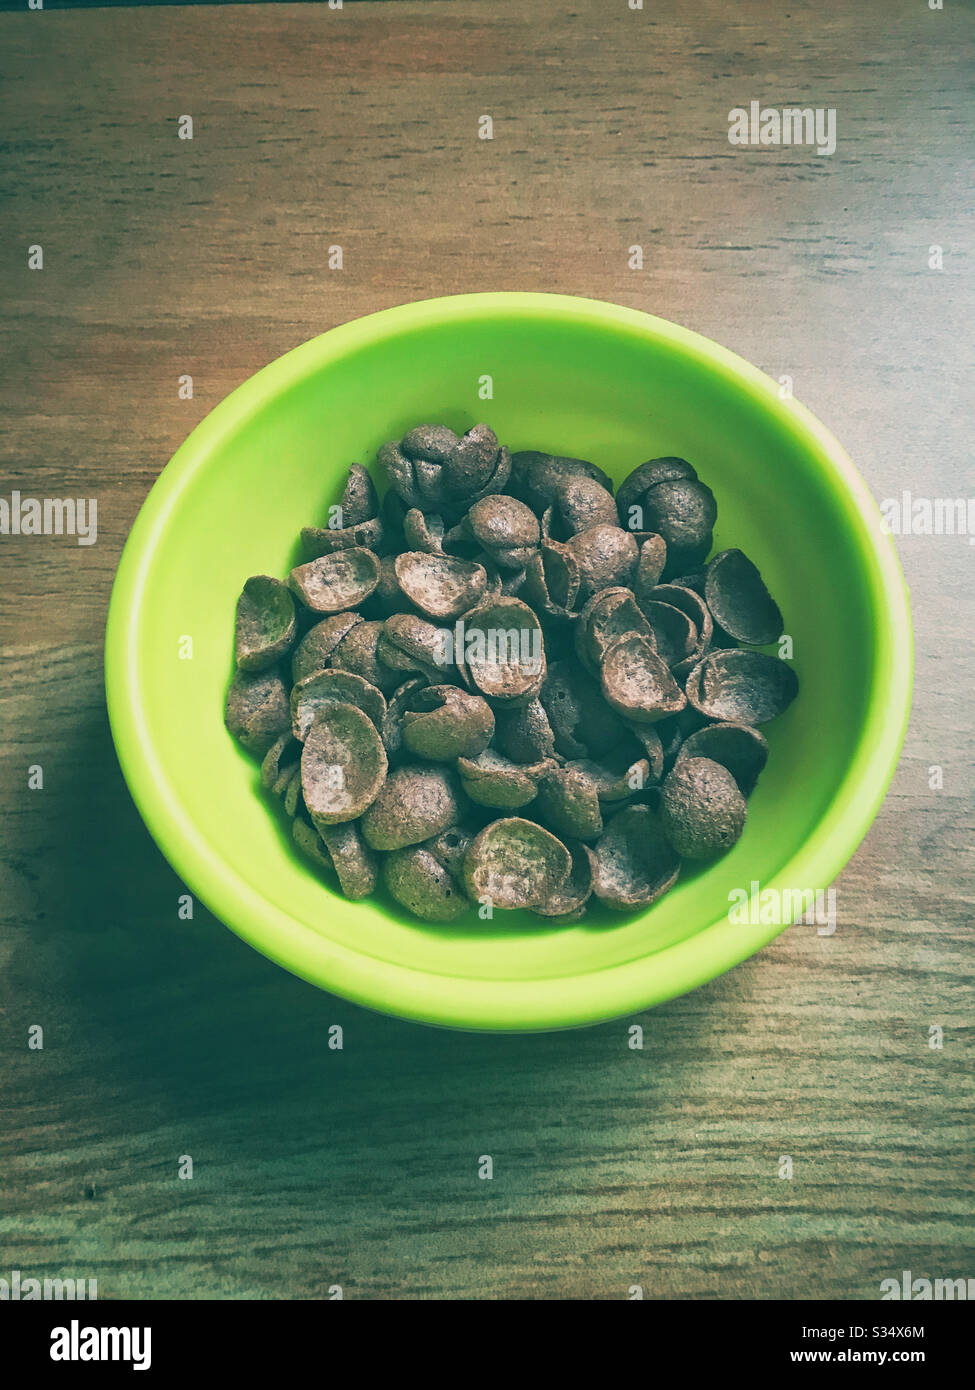 Chocolate cereal in a green plastic bowl. Stock Photo